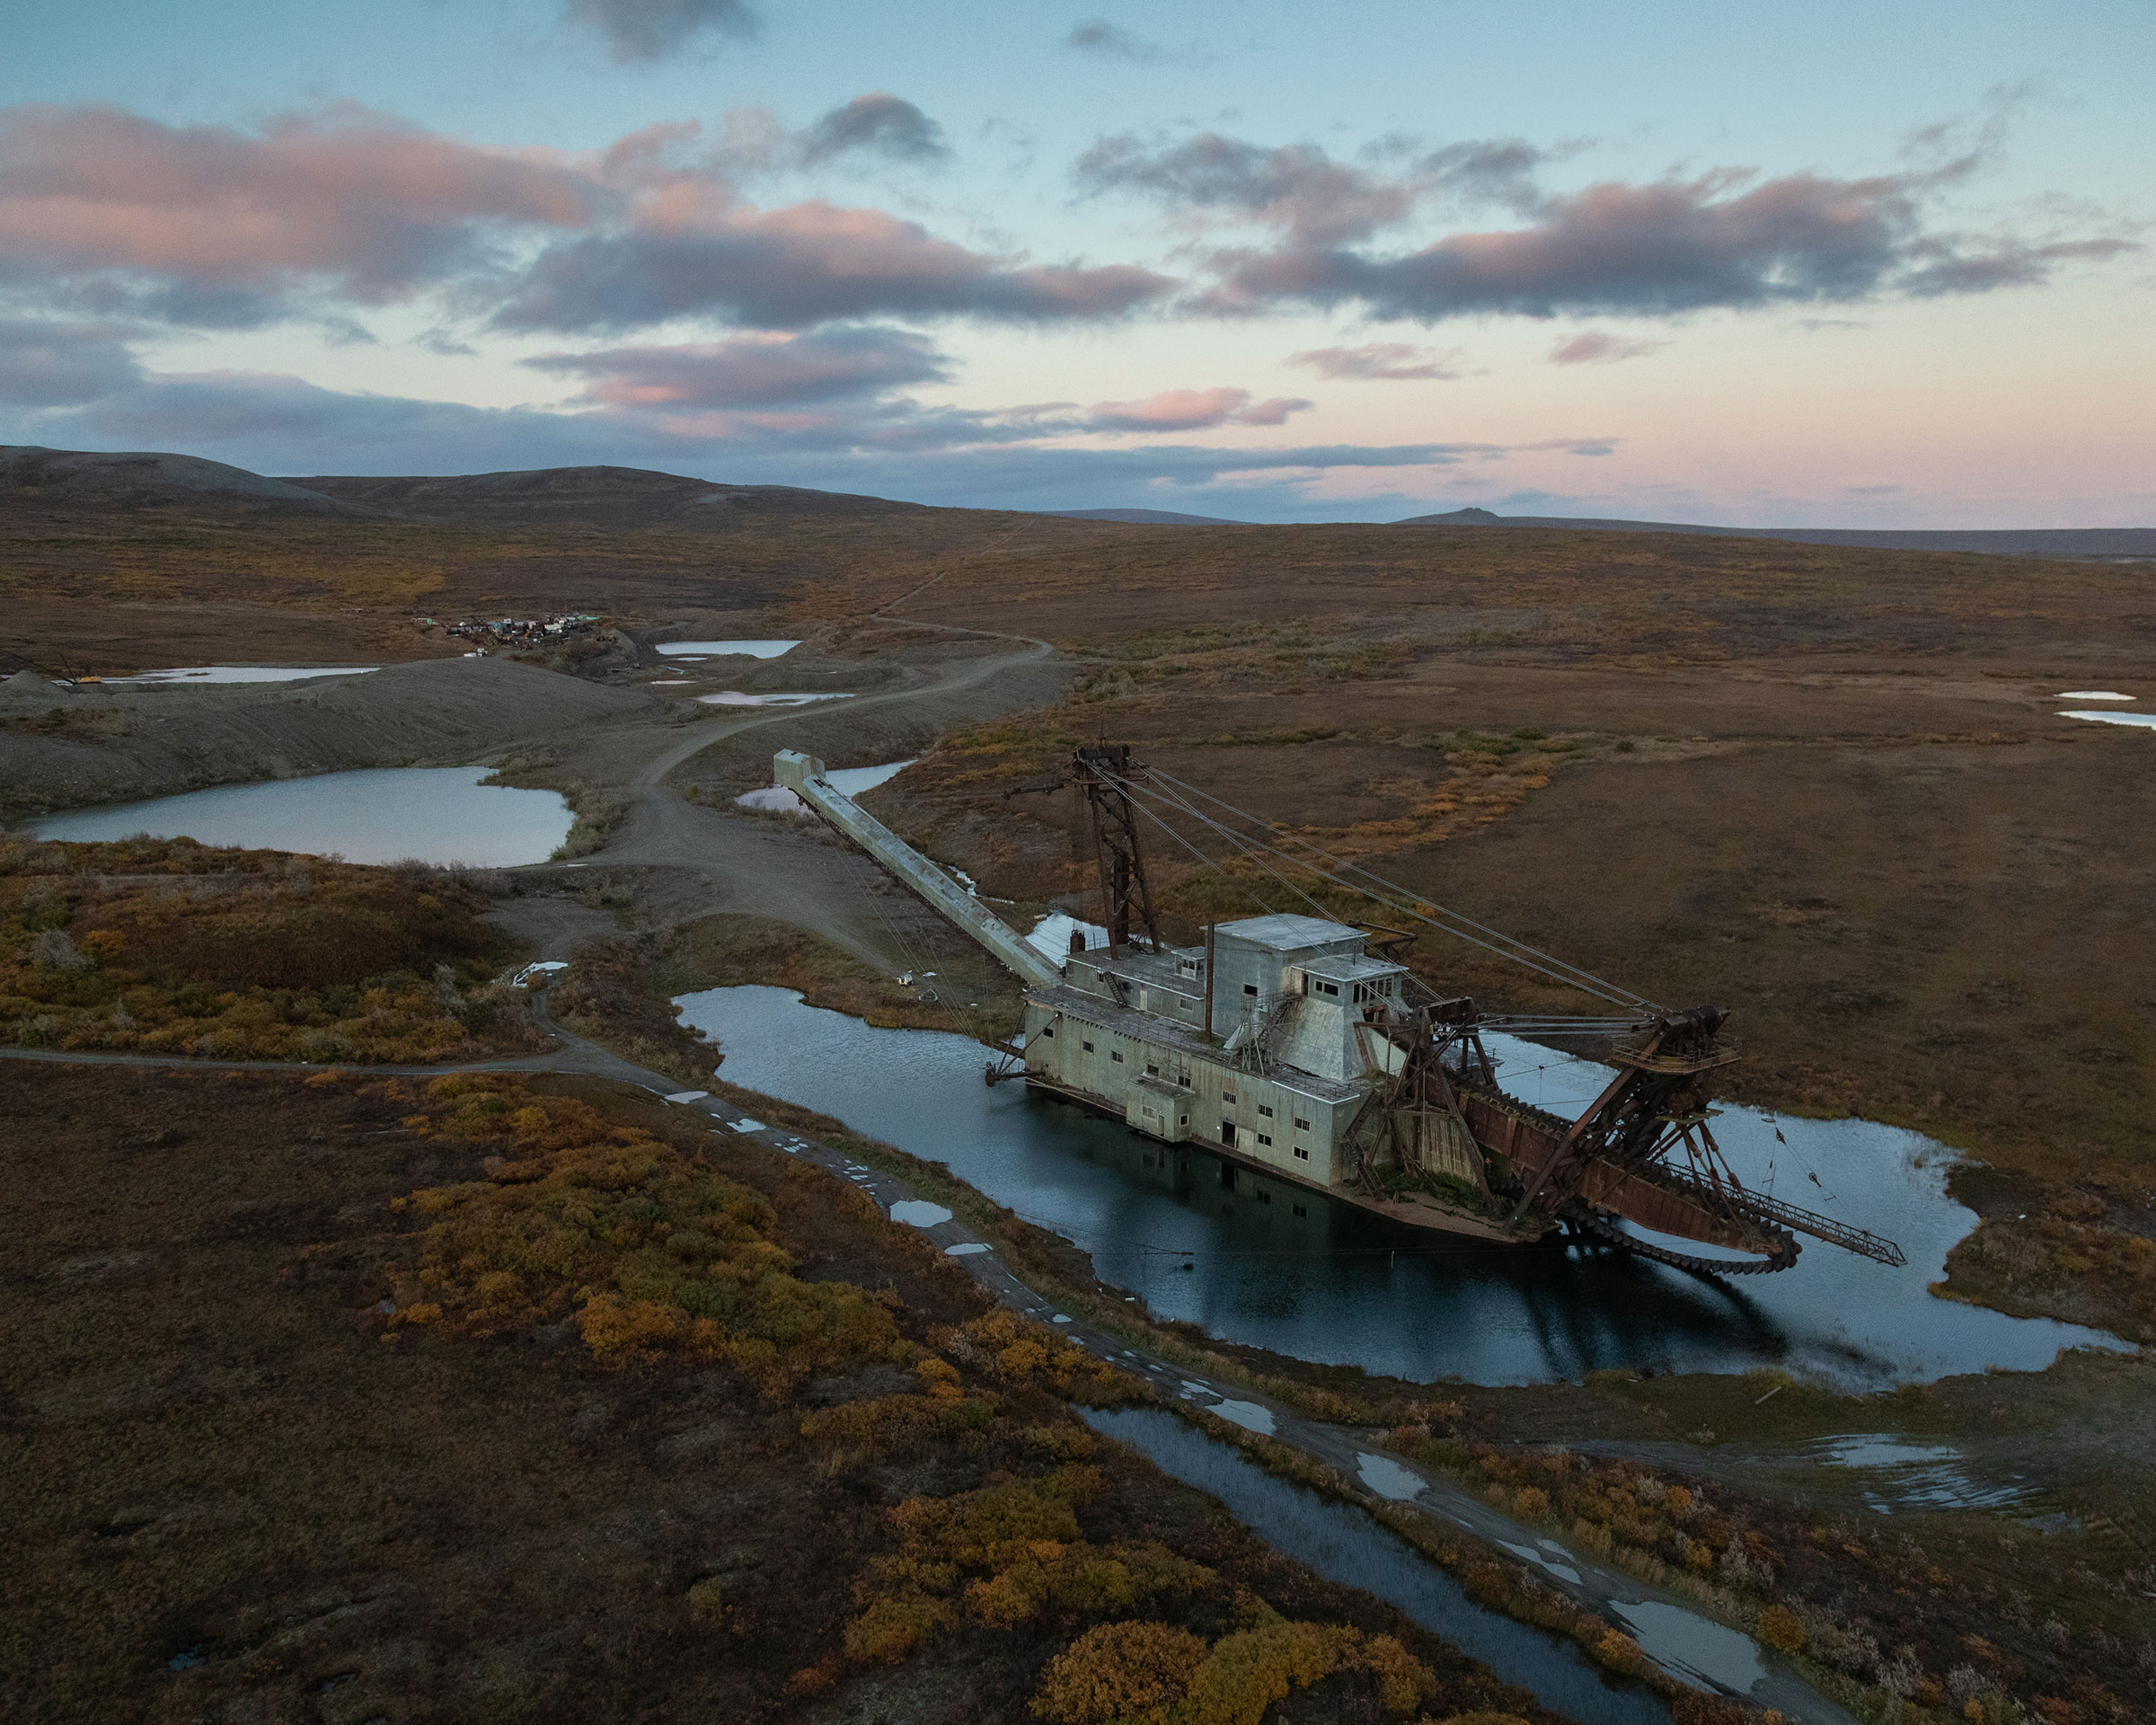 An abandoned gold dredger sits in the tundra behind Nome, <a href="https://time.com/6174947/melting-arctic-indigenous-communities-alaska/">Alaska</a>, on Sept. 19, 2021. The present-day city of Nome was established as a result of the gold rush that brought thousands of prospectors in the early 1900s. (Acacia Johnson for TIME)